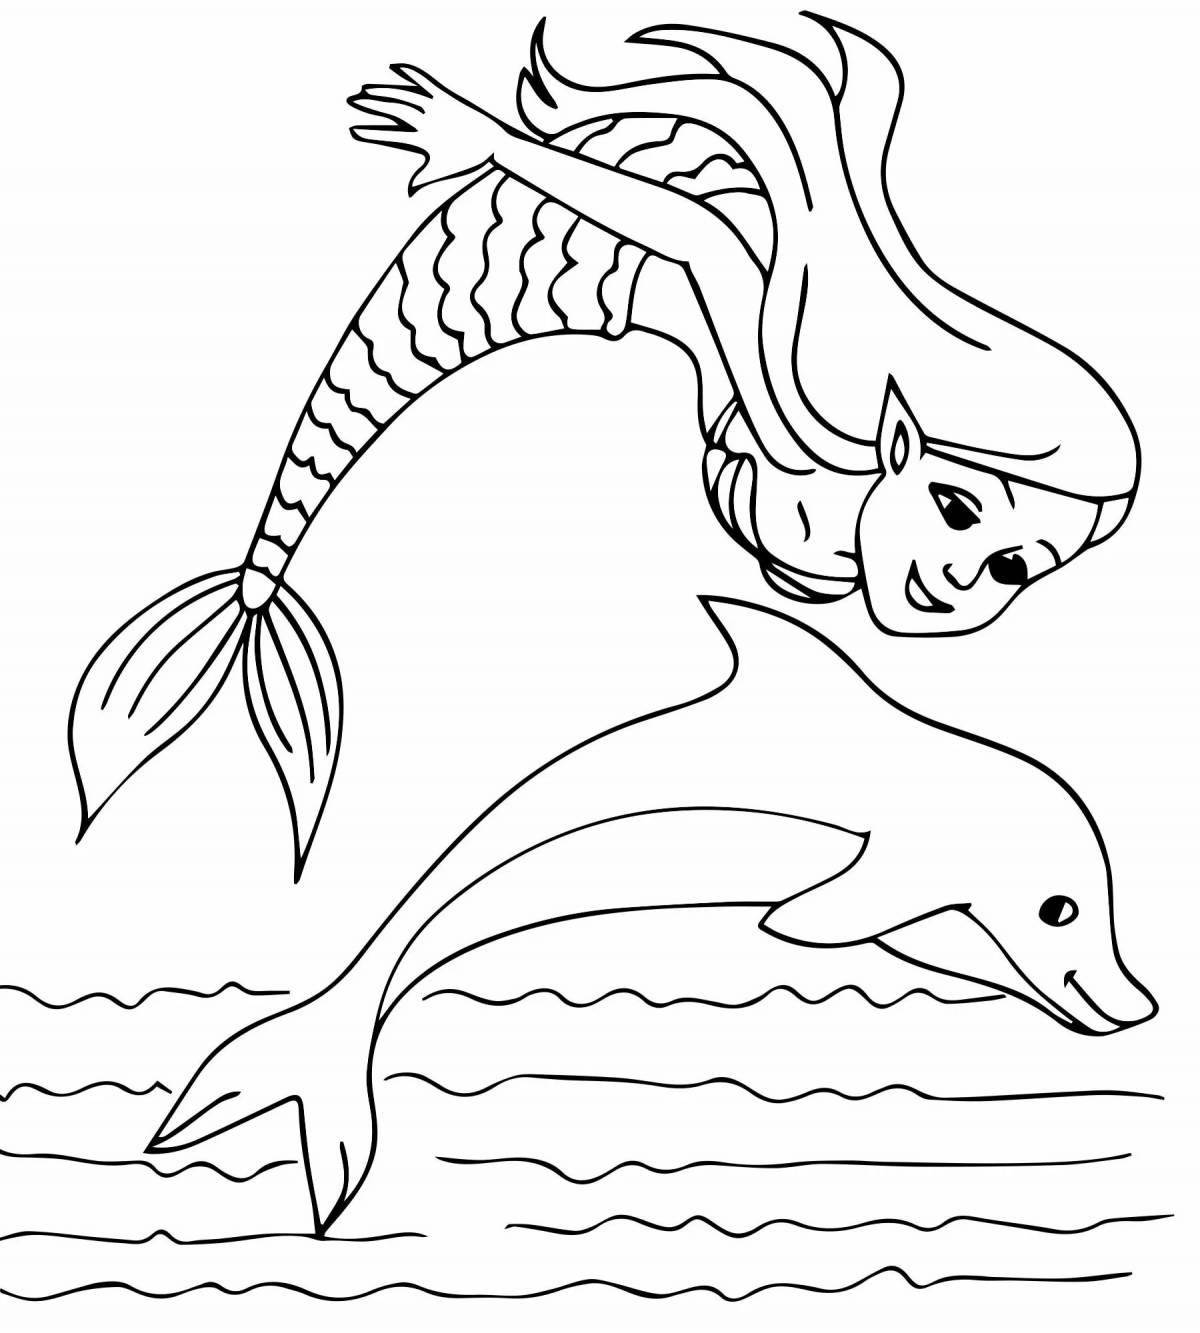 Magic coloring mermaid and dolphin